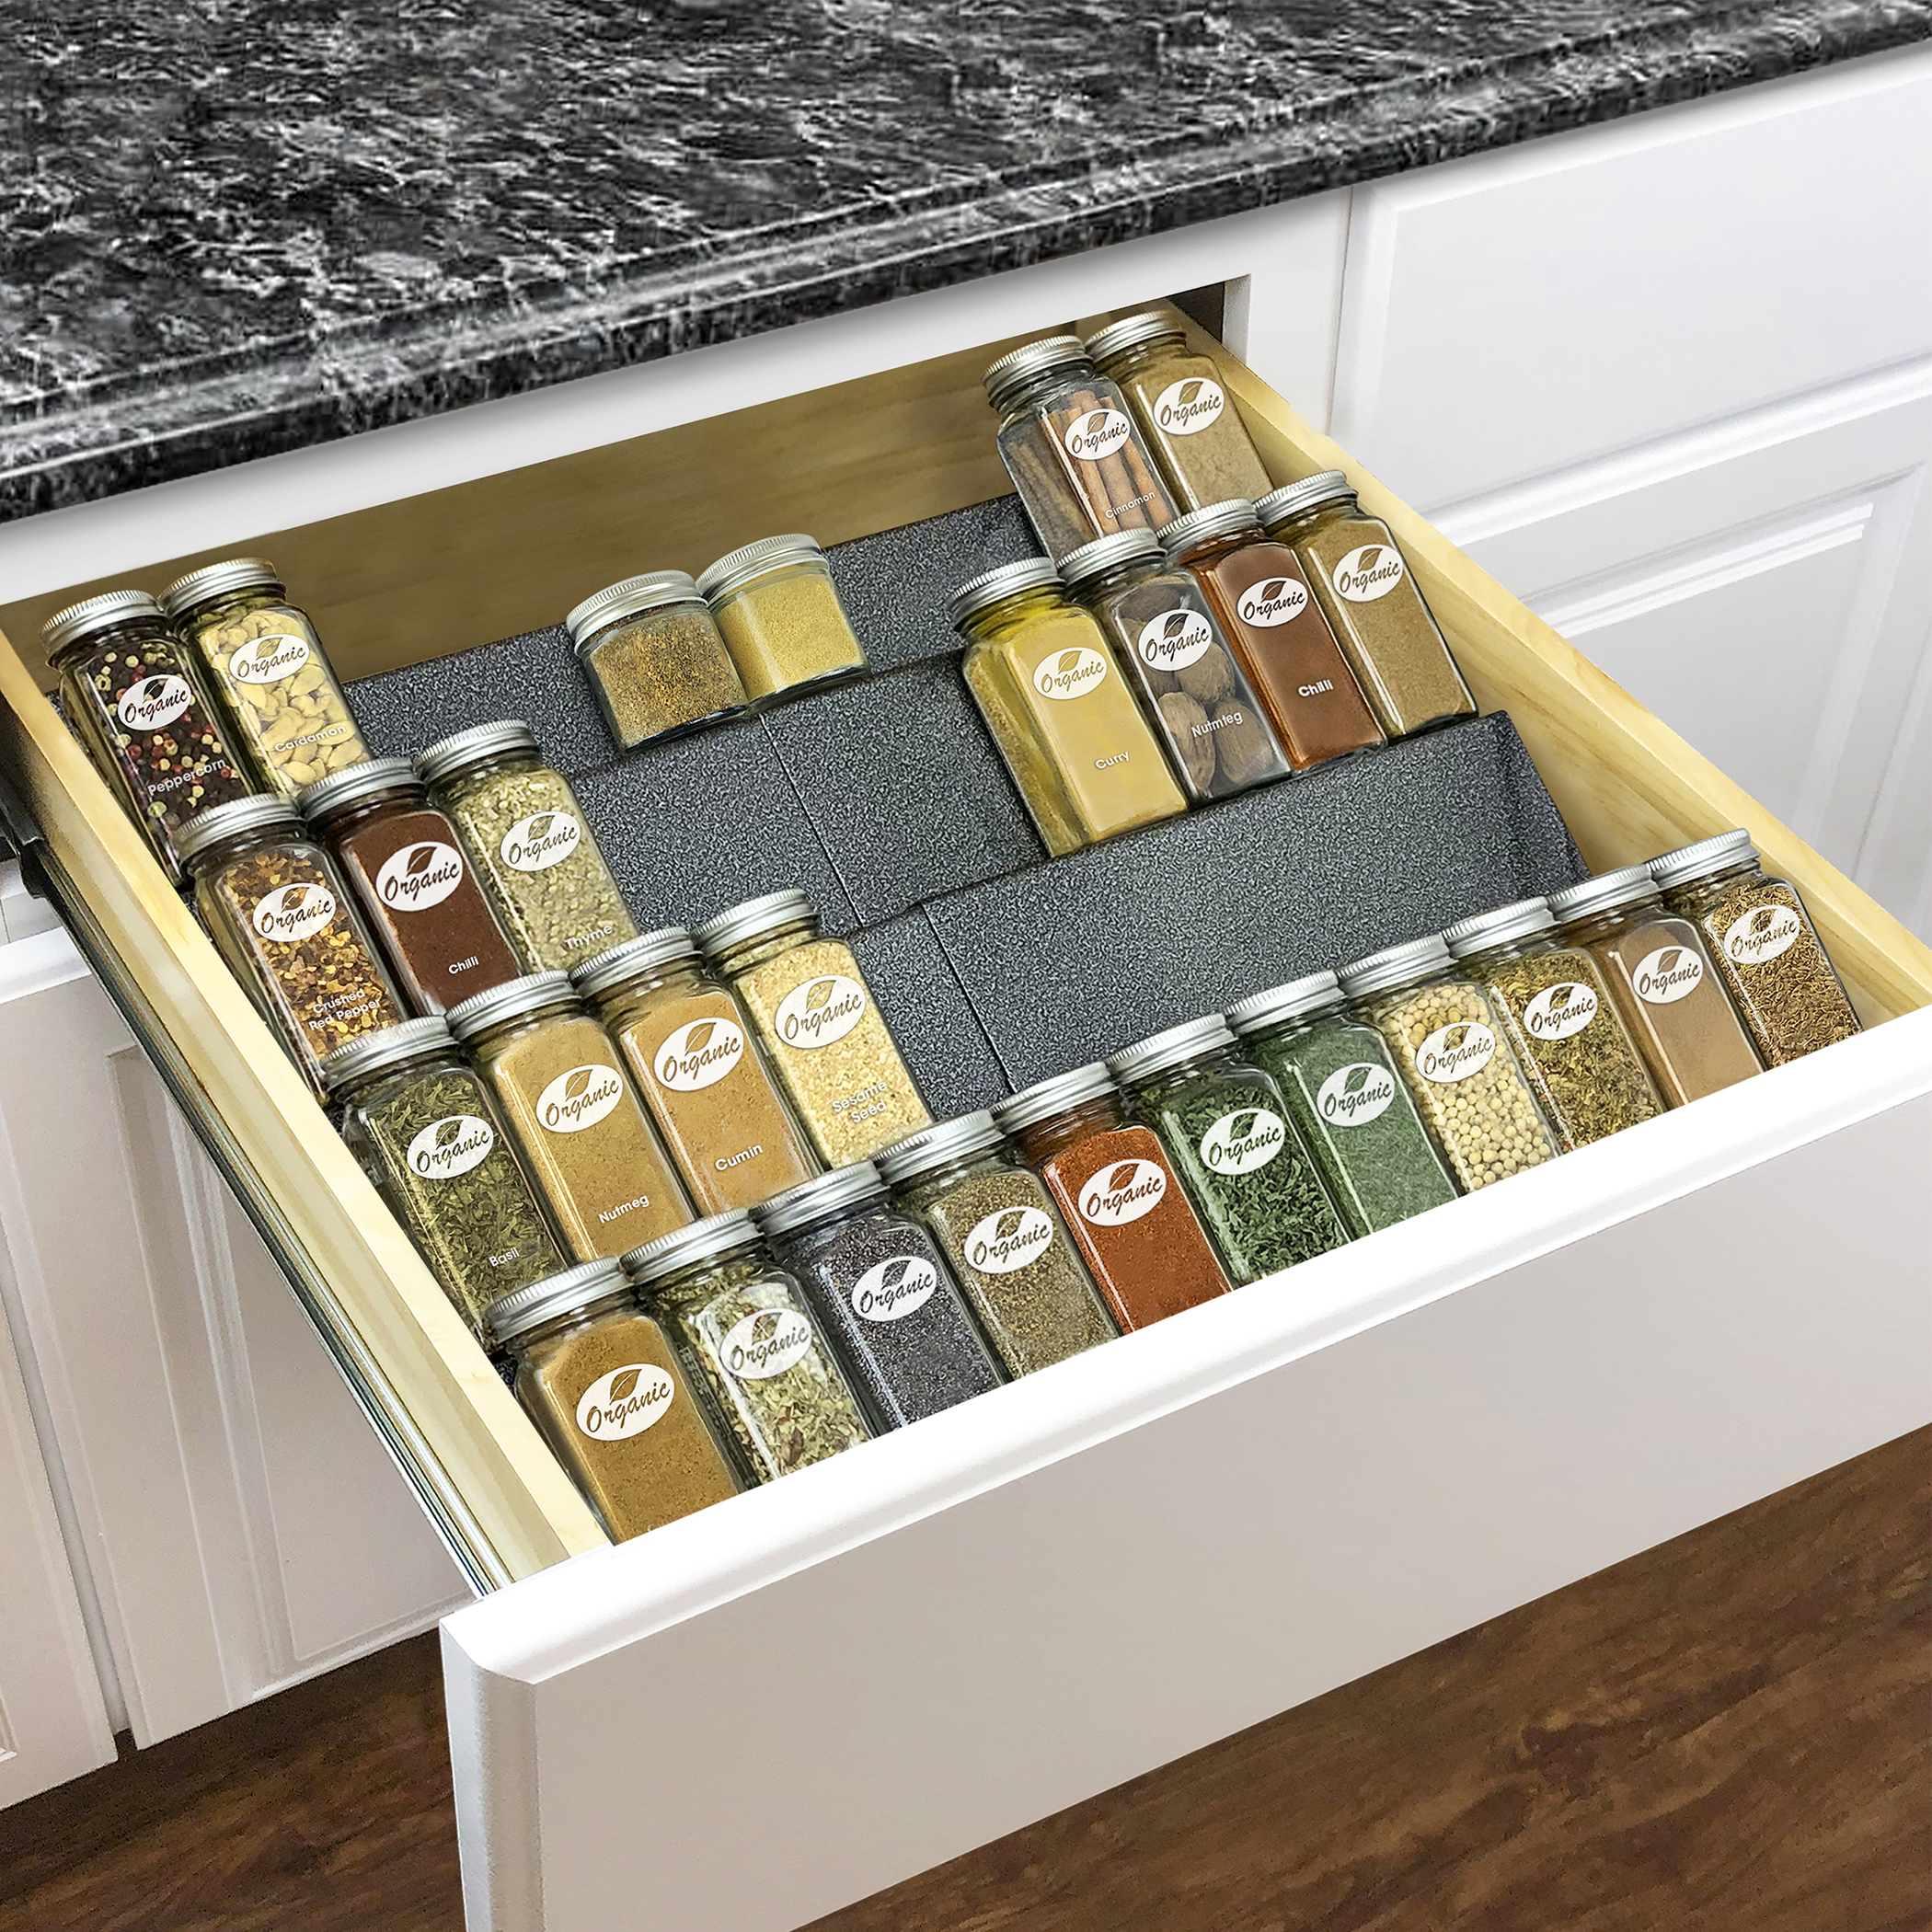 Famhap Spice Drawer Organizer, 6 Tier Expandable from 11.6 to 23.2  Seasoning Rack Tray Insert for Kitchen Drawers, Spice Rack Drawer for Spice  Jars